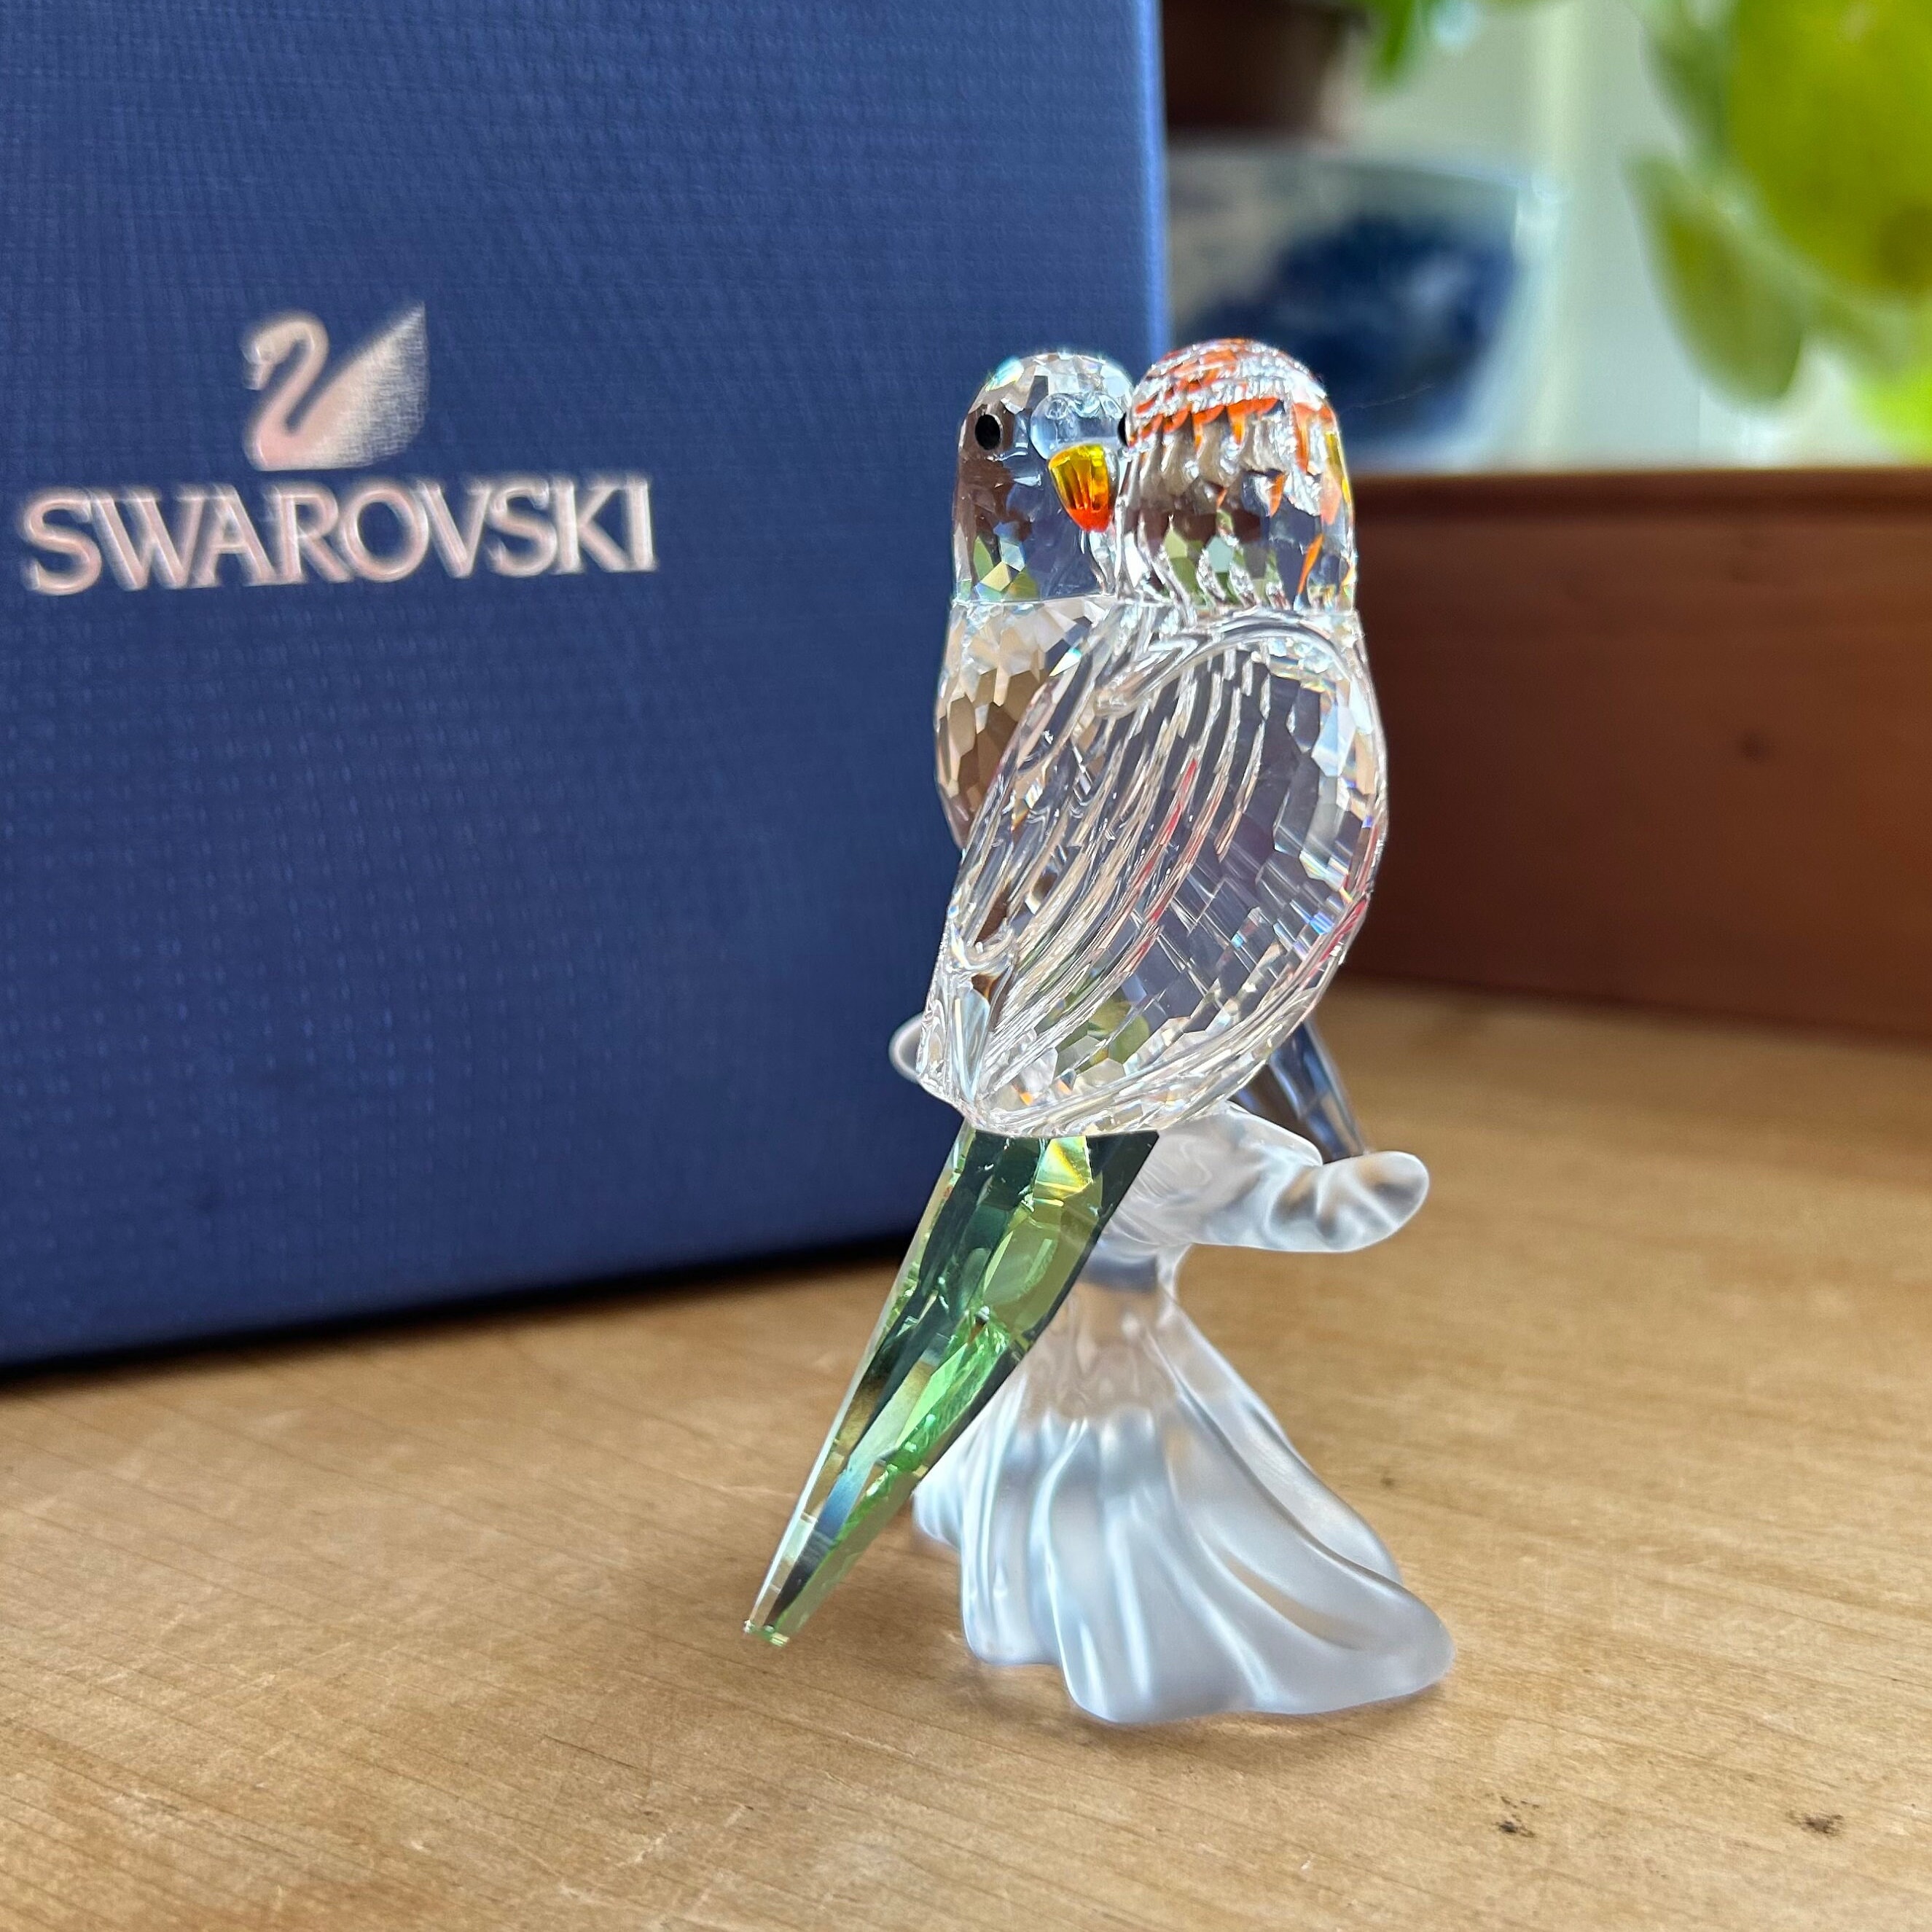 Swarovski Crystal, Austria C2005 Crystal Figurine of Budgies or Parakeets  Perched on a Tree With Colour Accents in Box 680627 H 8.3cm 3.3in 